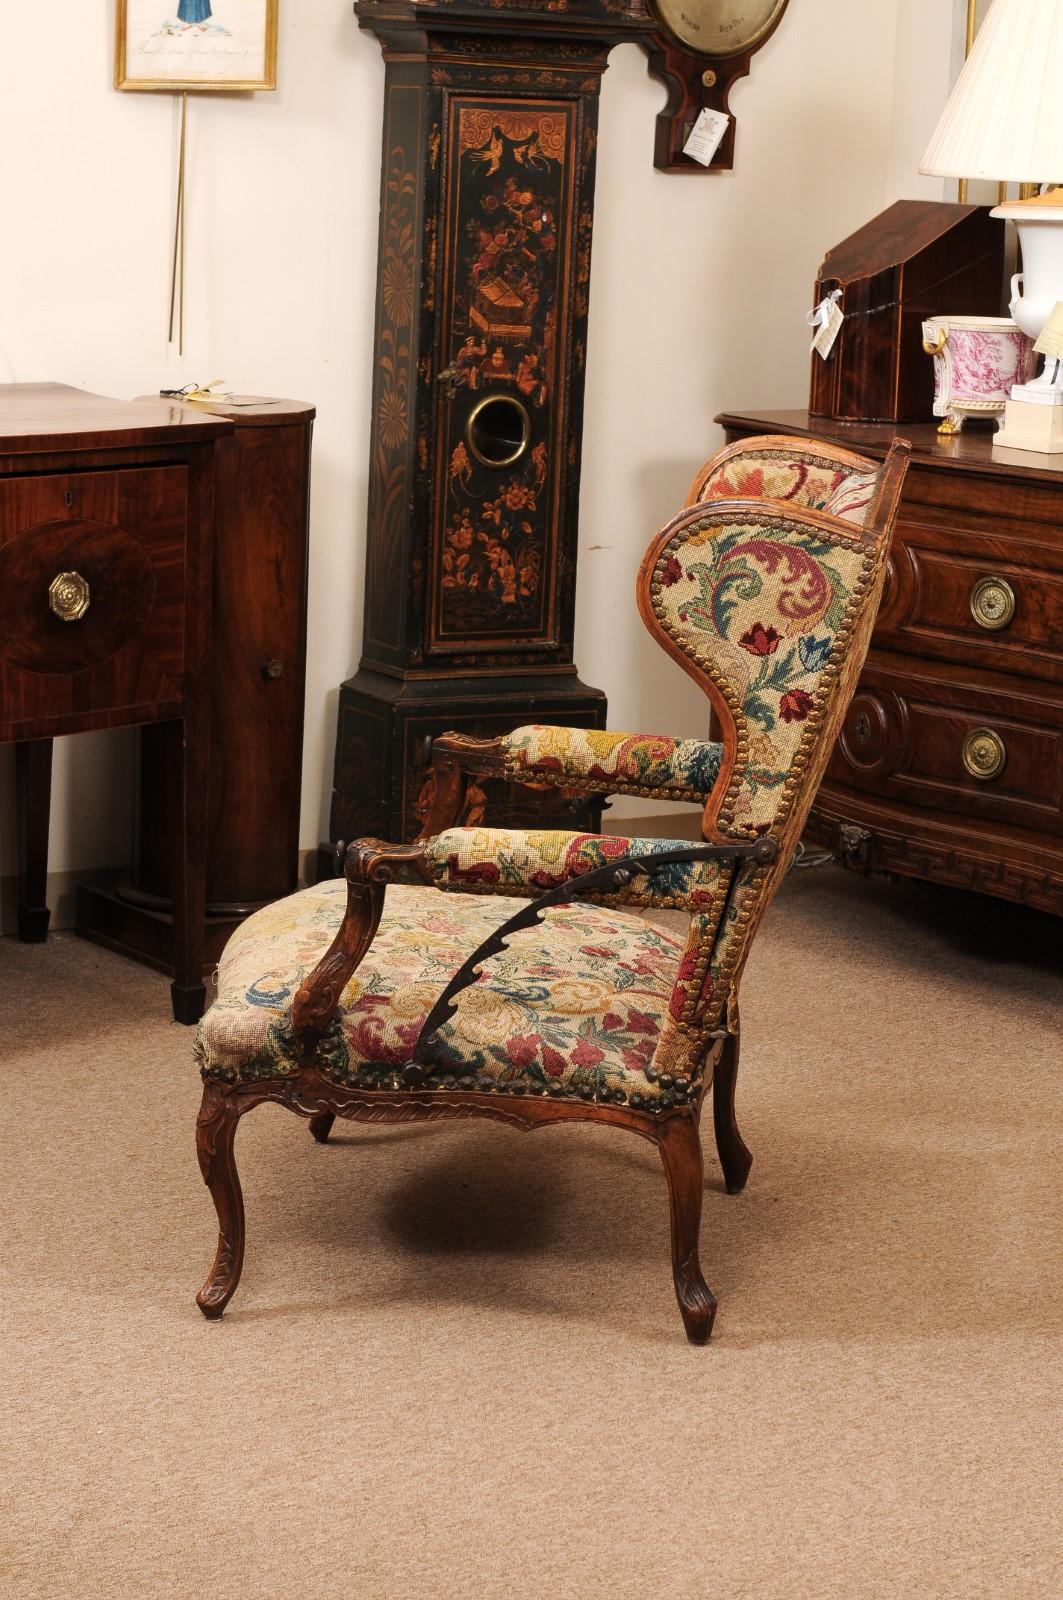 Early 18th Century French Regence Period Walnut Ratchet Wing Chair with Needlewo For Sale 7